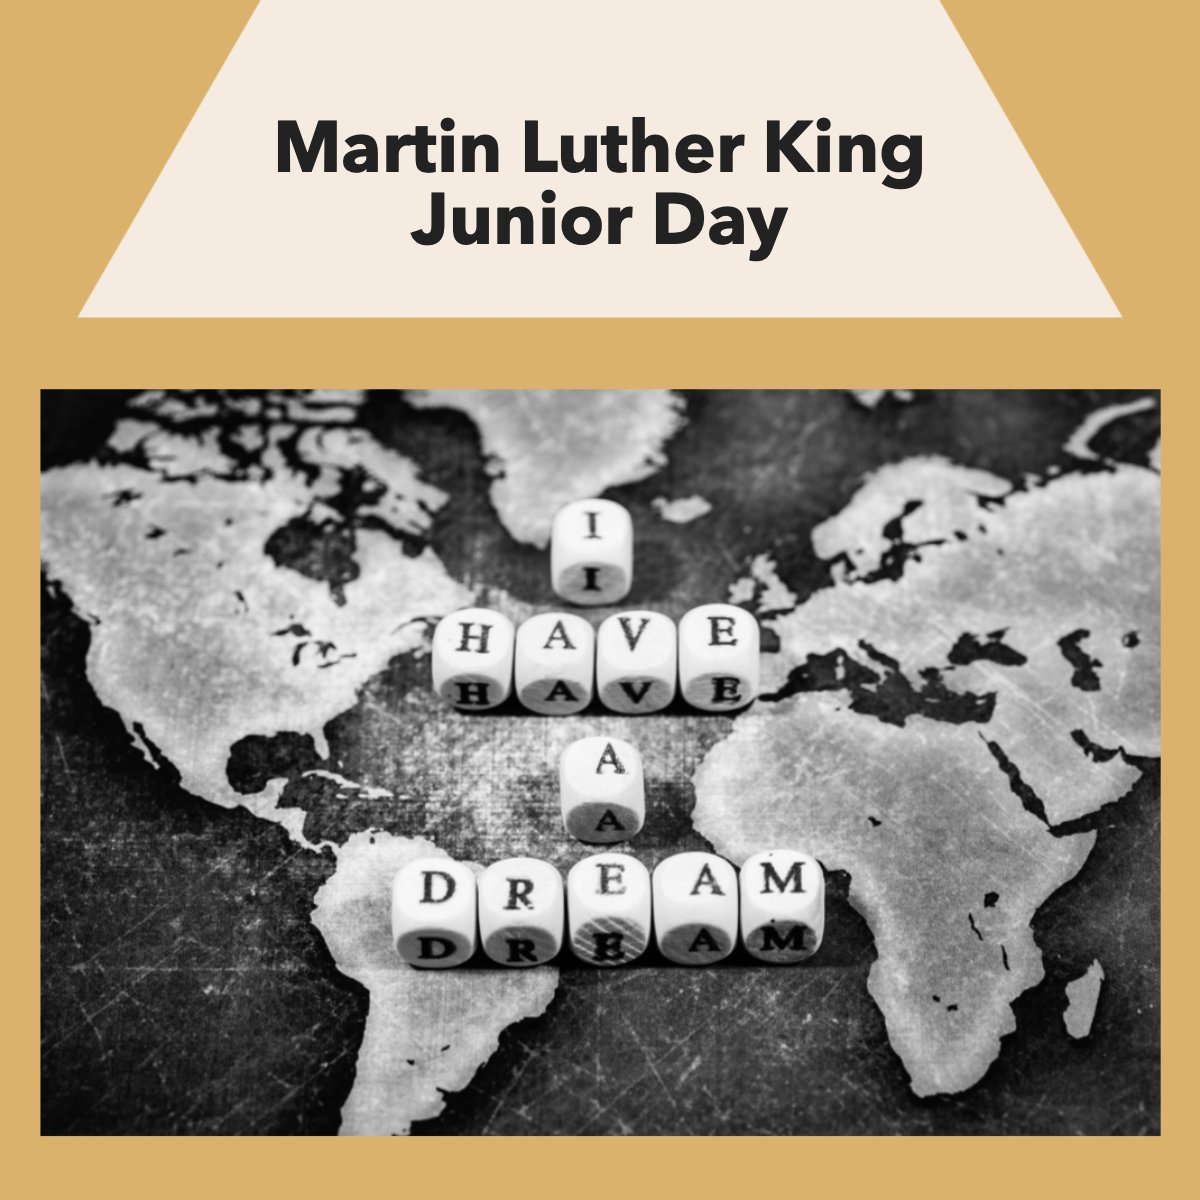 Today we honor the amazing accomplishments of Dr. Martin Luther King Jr. and all who continue to fight for social justice and racial equality.

#mlk #jr #martinlutherkingjunior #mlkjr #ihaveadream #countries #map
 #HomeForSale #SimiValleyHOmes #ThousandOaksHOmesforSale